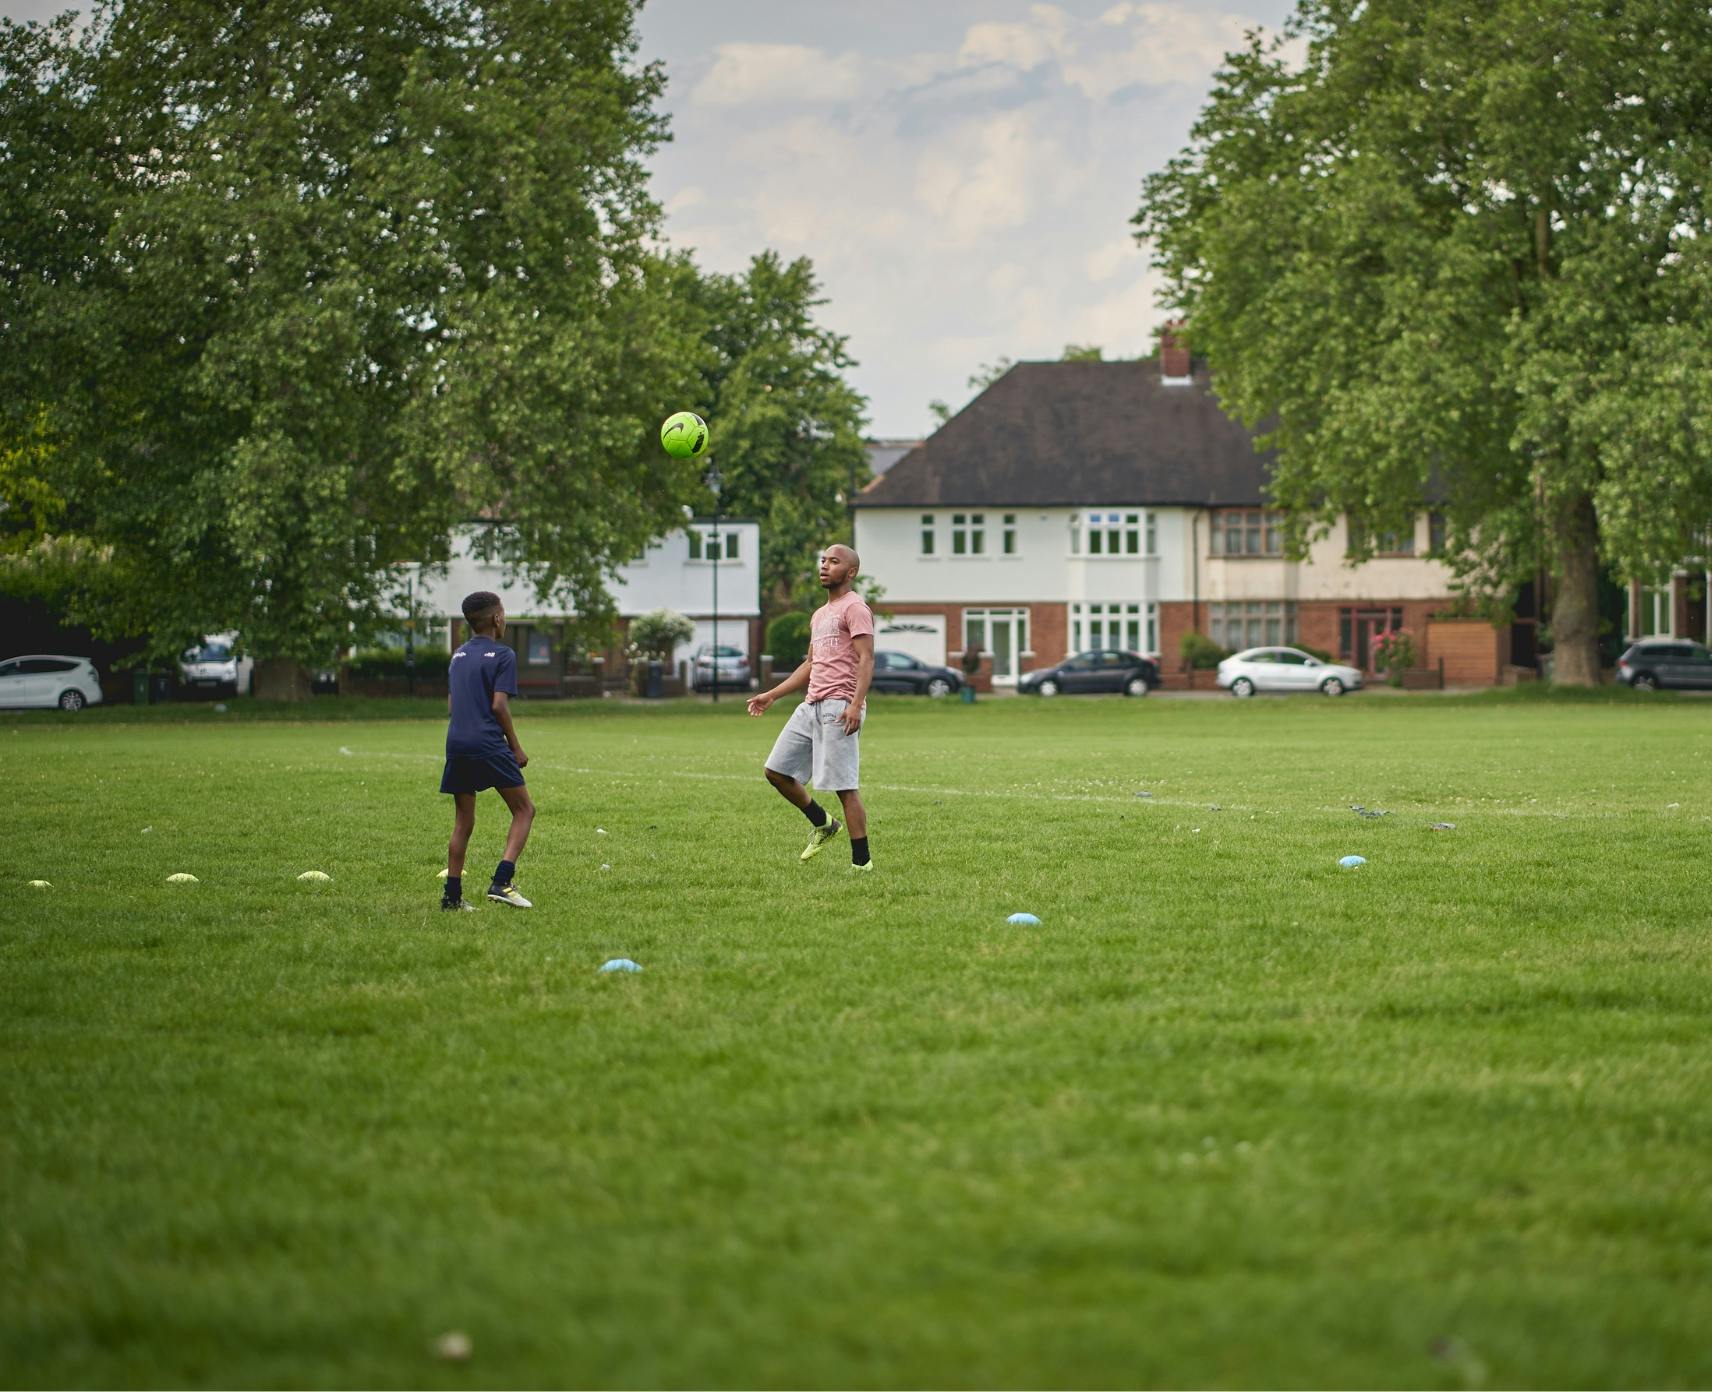 Two young men playing soccer in a park in South-East London